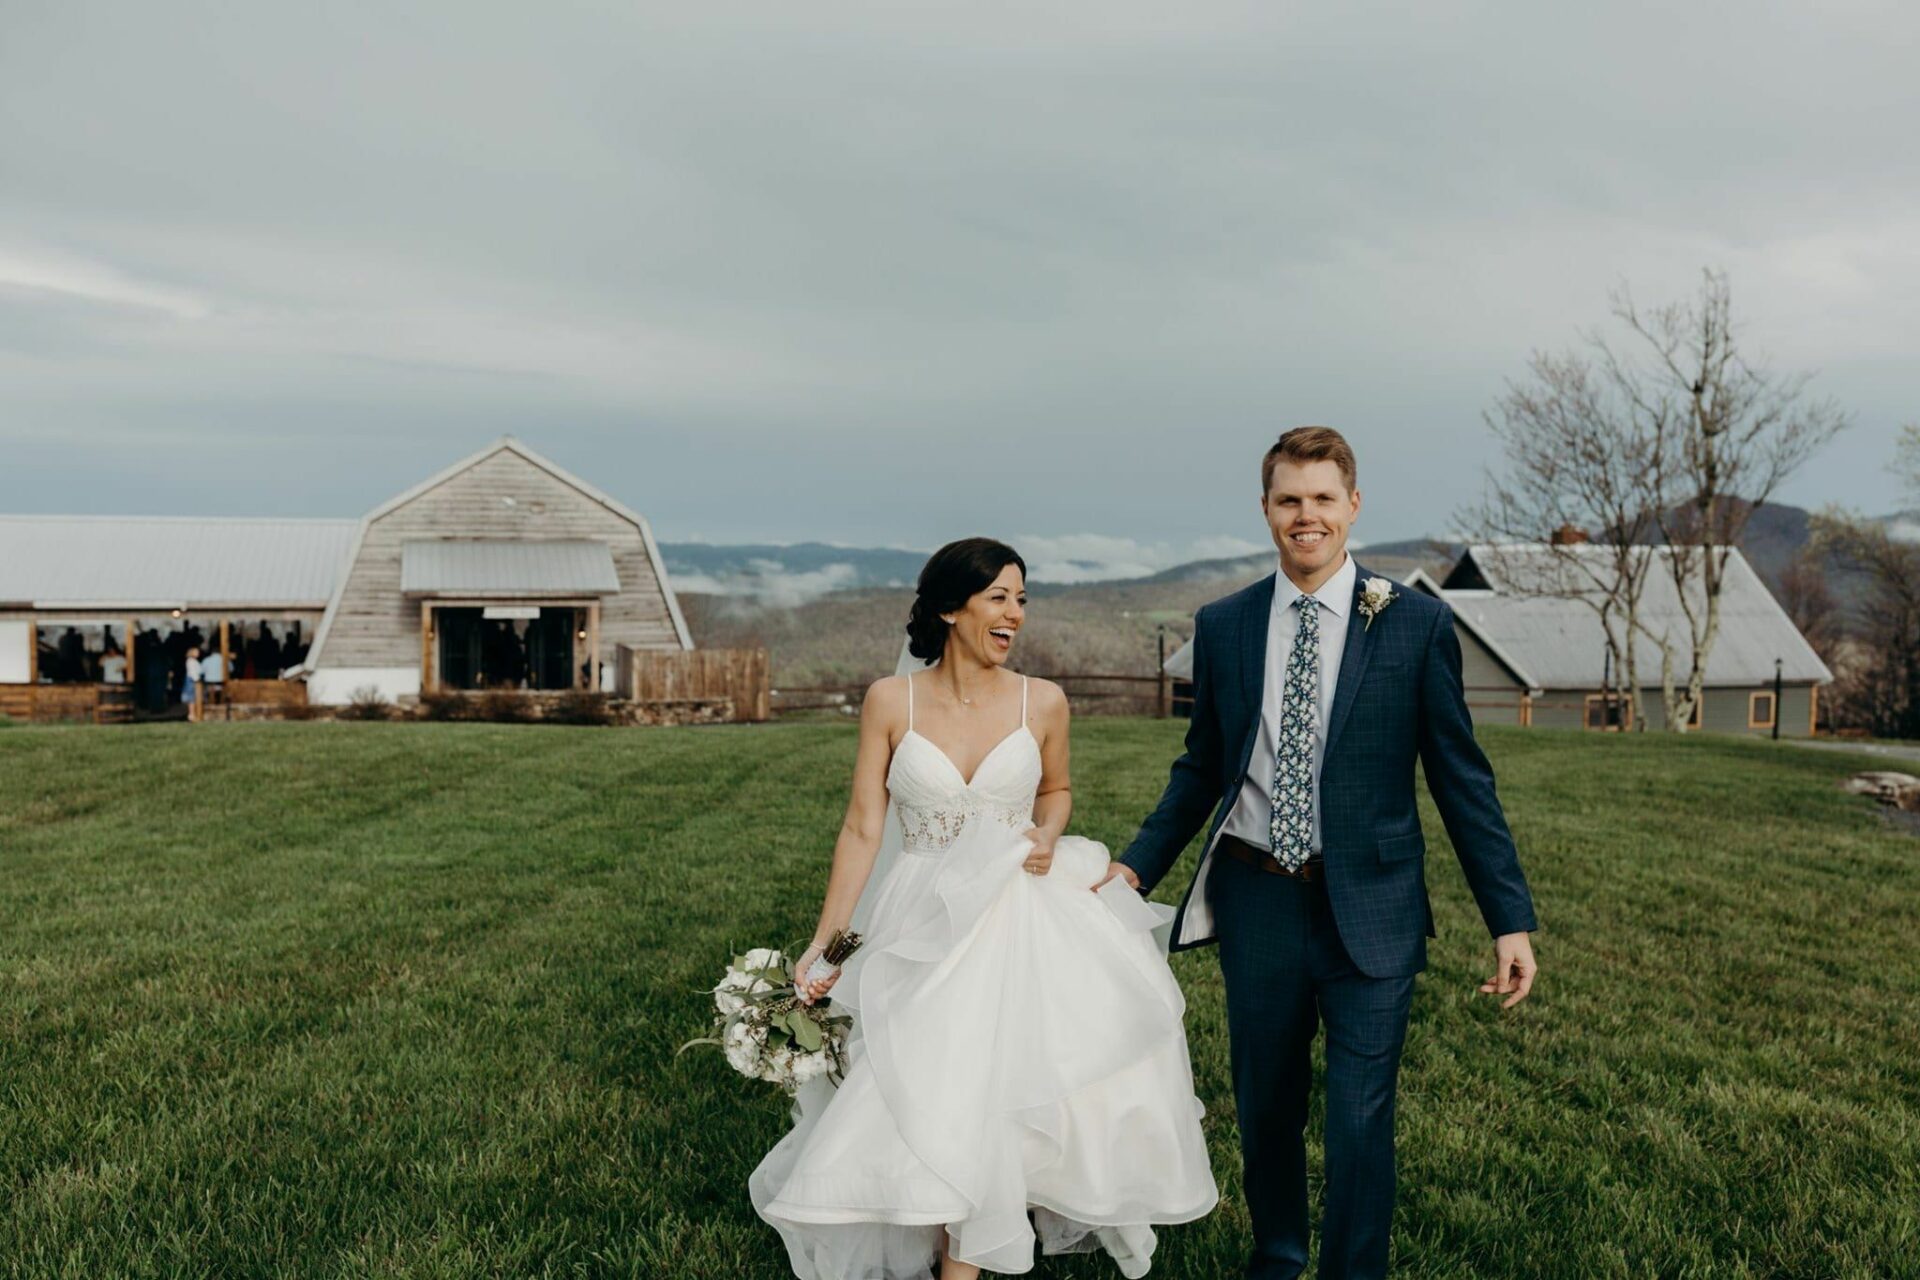 A bride and groom walking through a grassy field with a barn in the background.